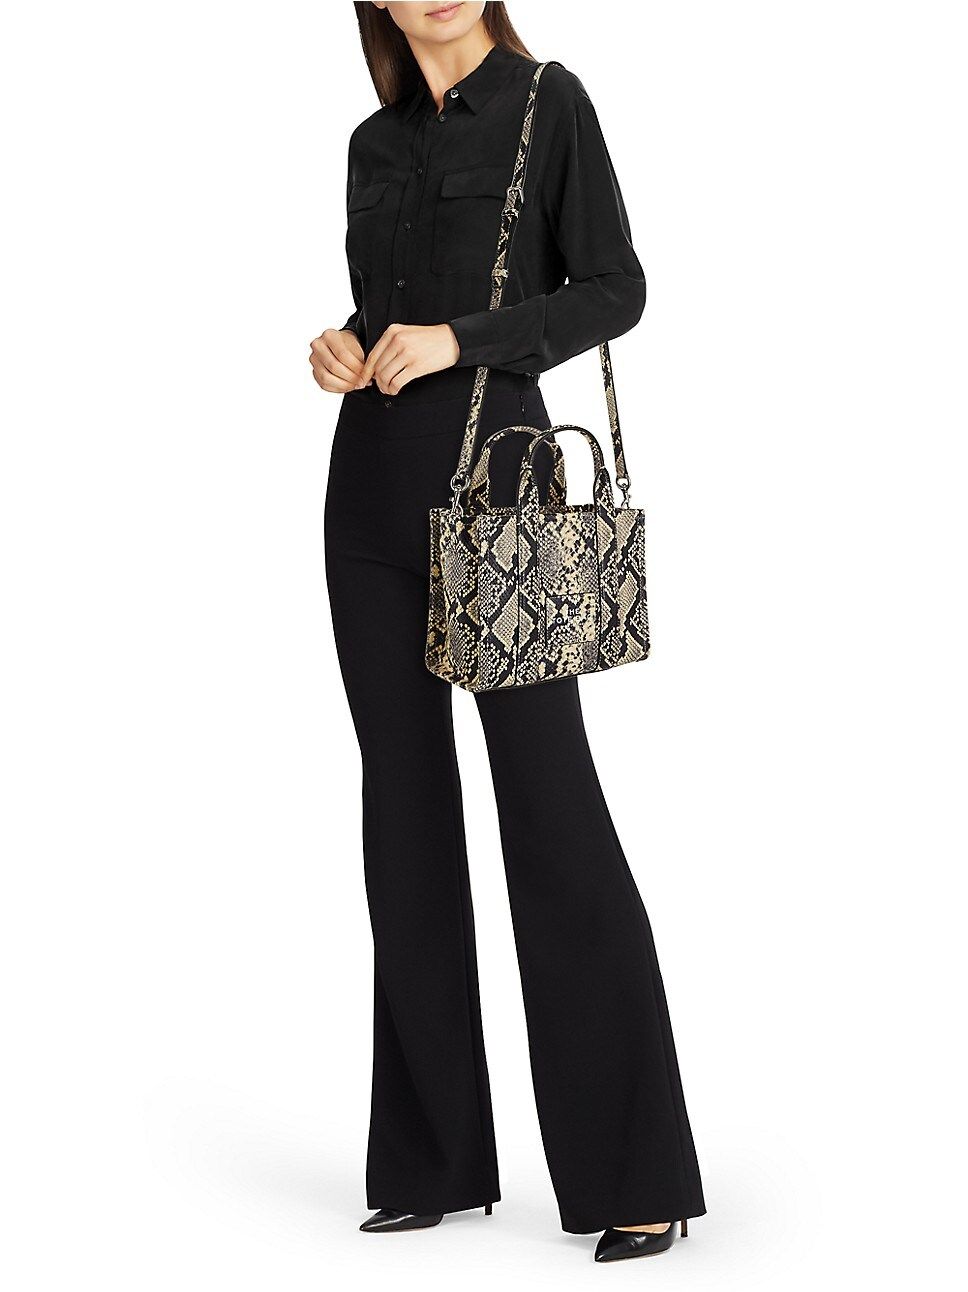 Marc Jacobs


The Snakeskin Small Tote



3.7 out of 5 Customer Rating | Saks Fifth Avenue